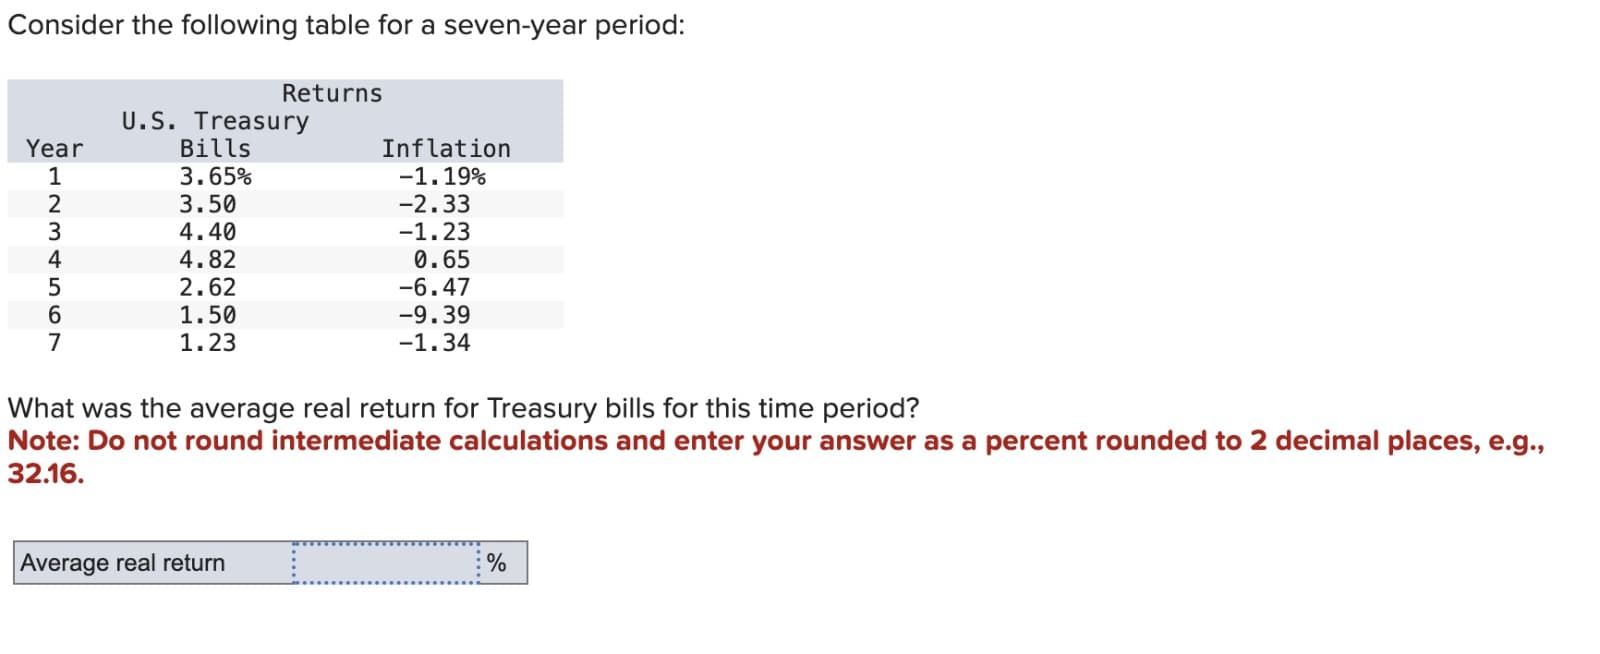 Consider the following table for a seven-year period:
Returns
U.S. Treasury
Year
Bills
Inflation
1234569
3.65%
-1.19%
3.50
-2.33
4.40
-1.23
4.82
0.65
2.62
-6.47
1.50
1.23
-9.39
-1.34
What was the average real return for Treasury bills for this time period?
Note: Do not round intermediate calculations and enter your answer as a percent rounded to 2 decimal places, e.g.,
32.16.
Average real return
%